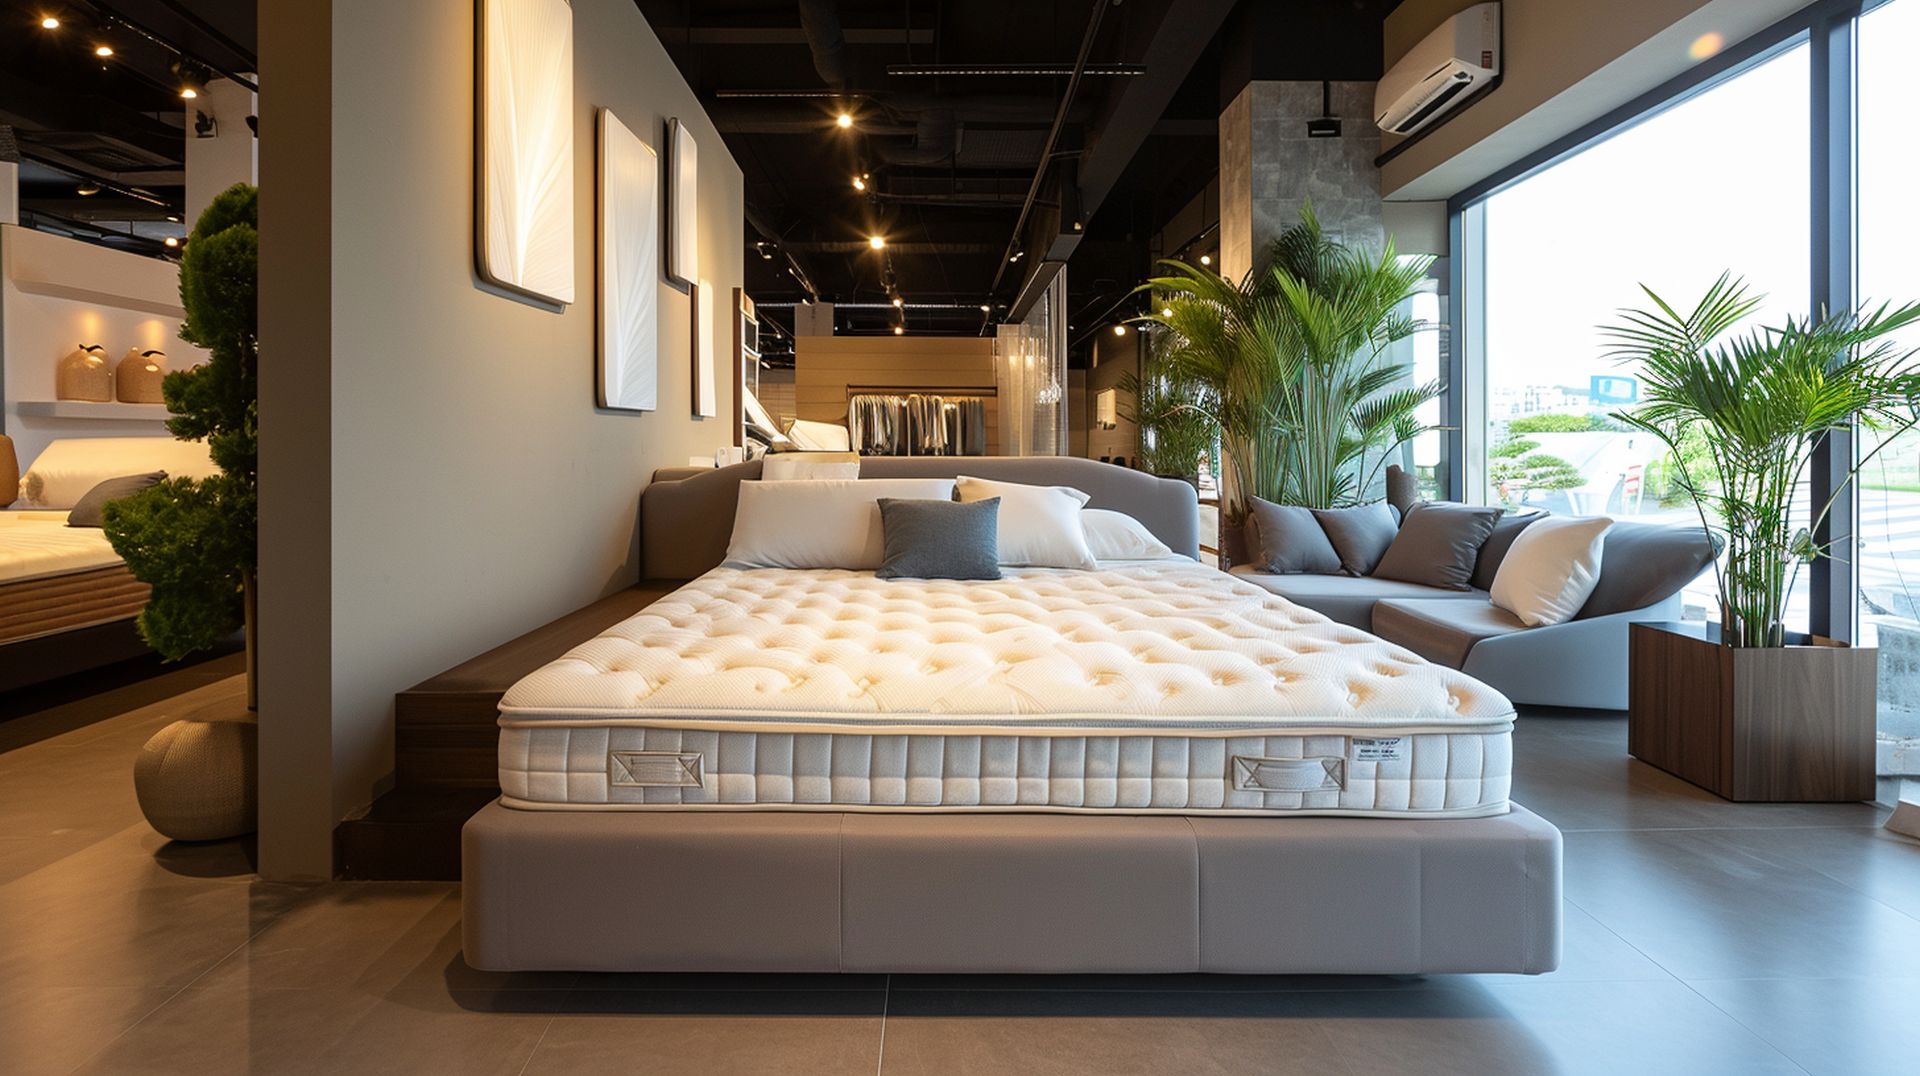 If you're looking for a new bed, mattress stores in Kalamazoo offer the best customer and delivery service, financing, and warranties in Michigan